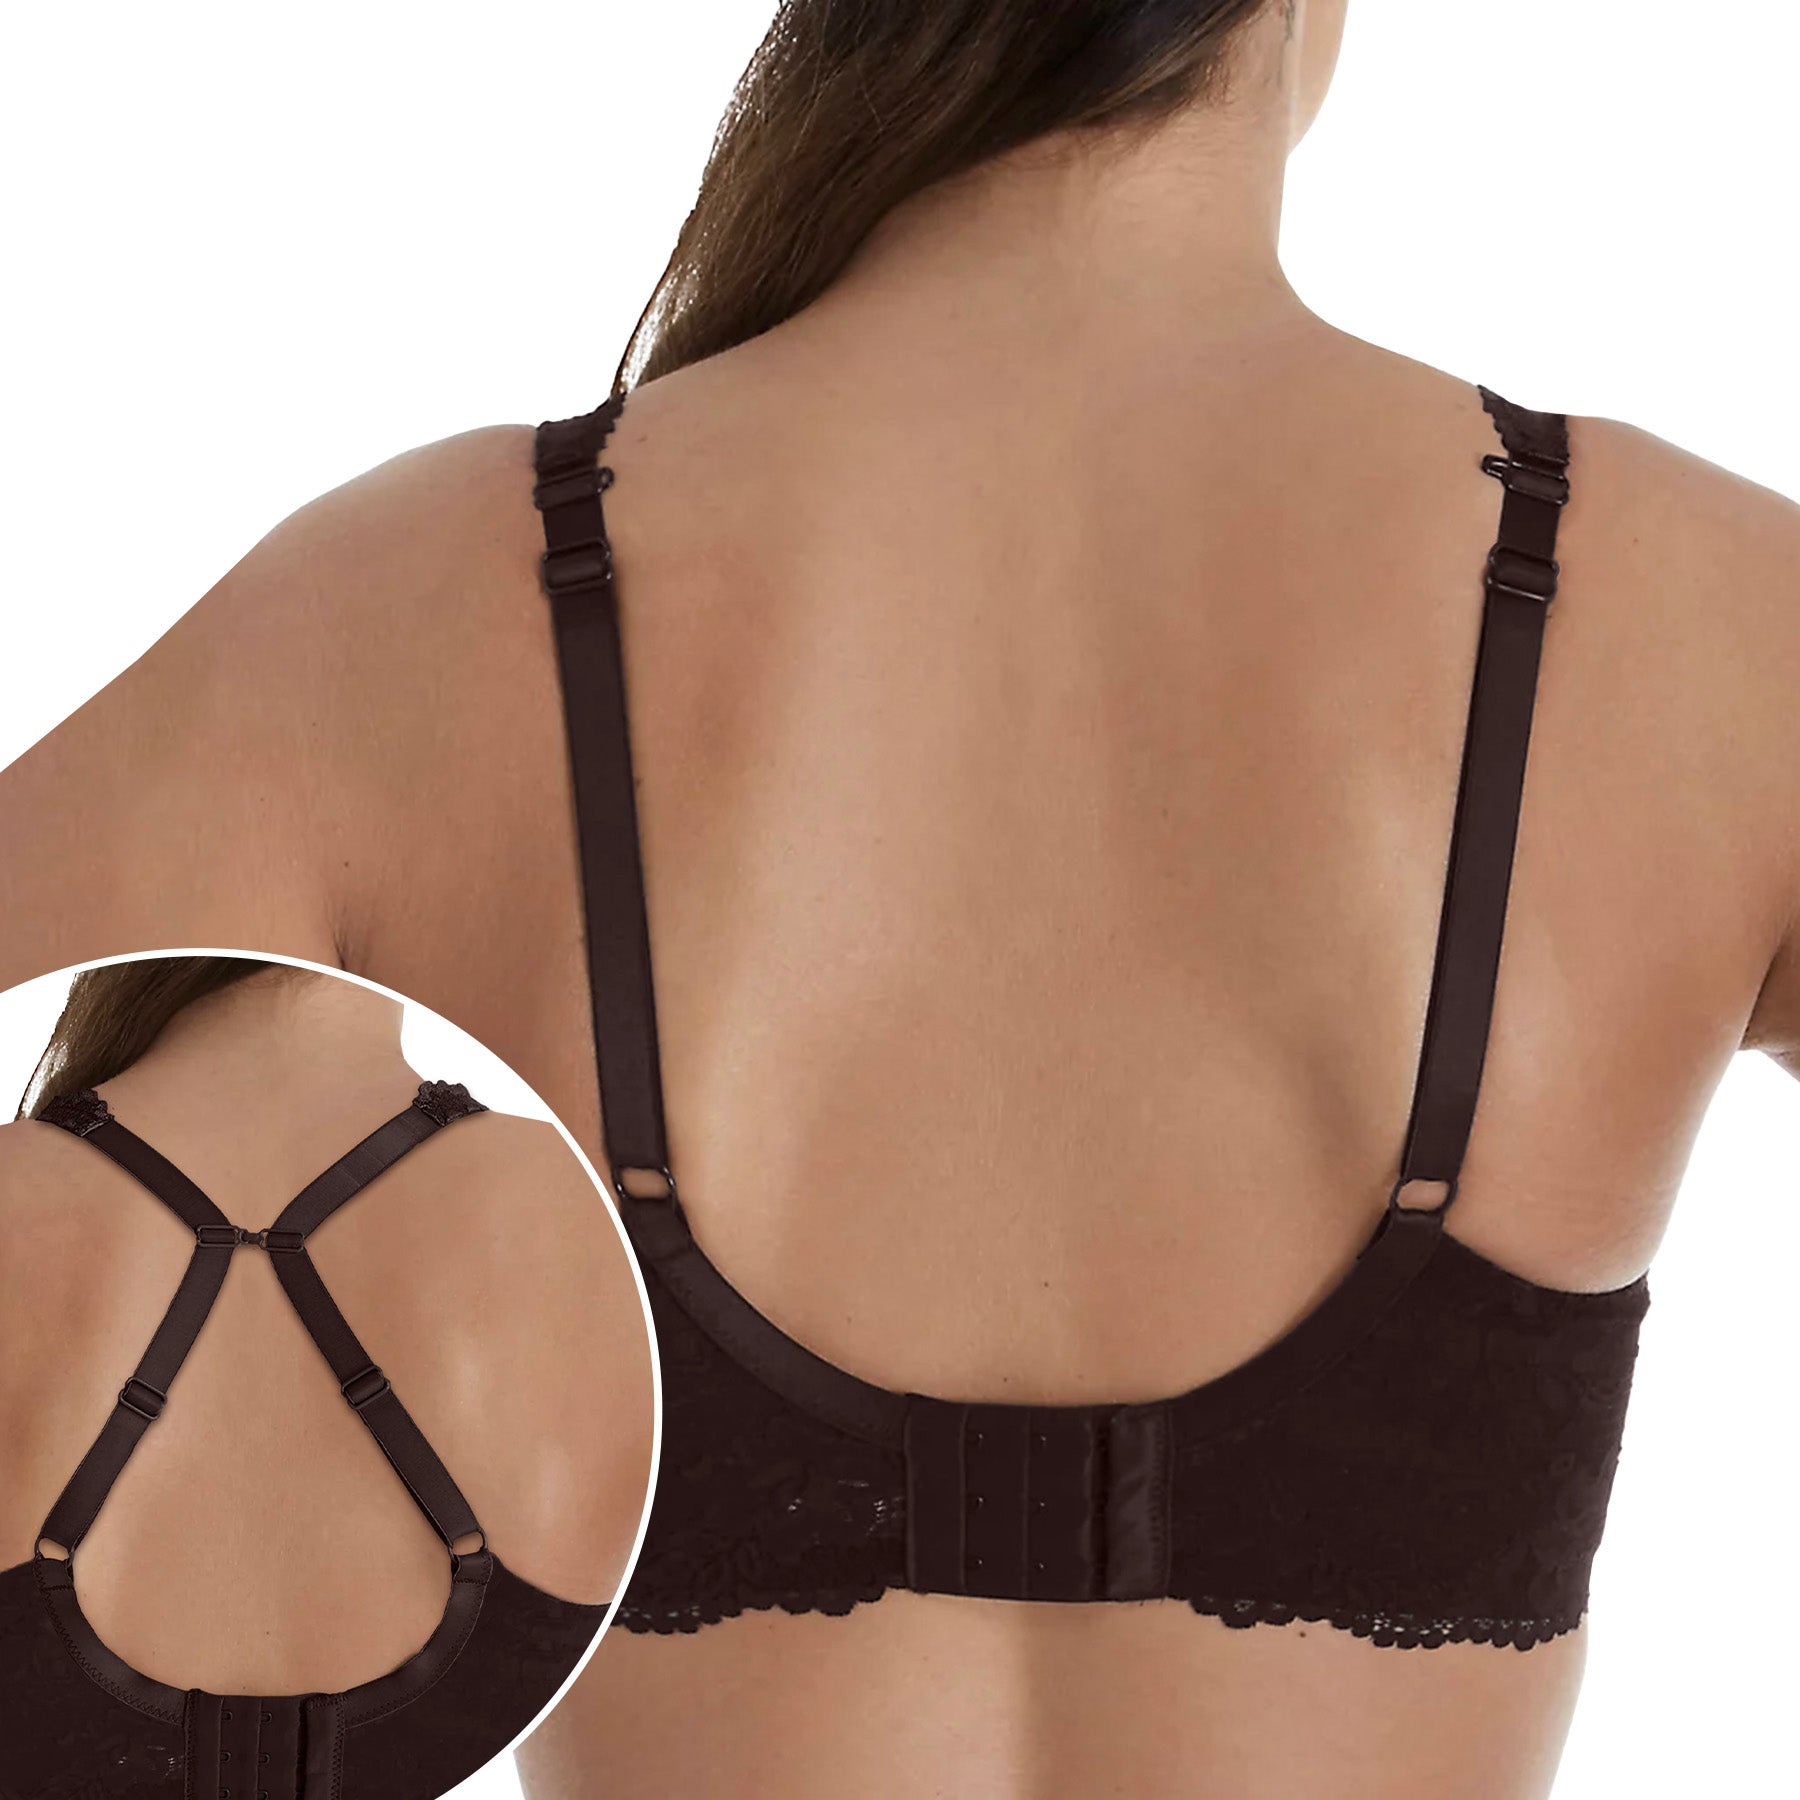 Fit Fully Yours Serena Lace Underwire Bra B2761 Chocolate Rear View